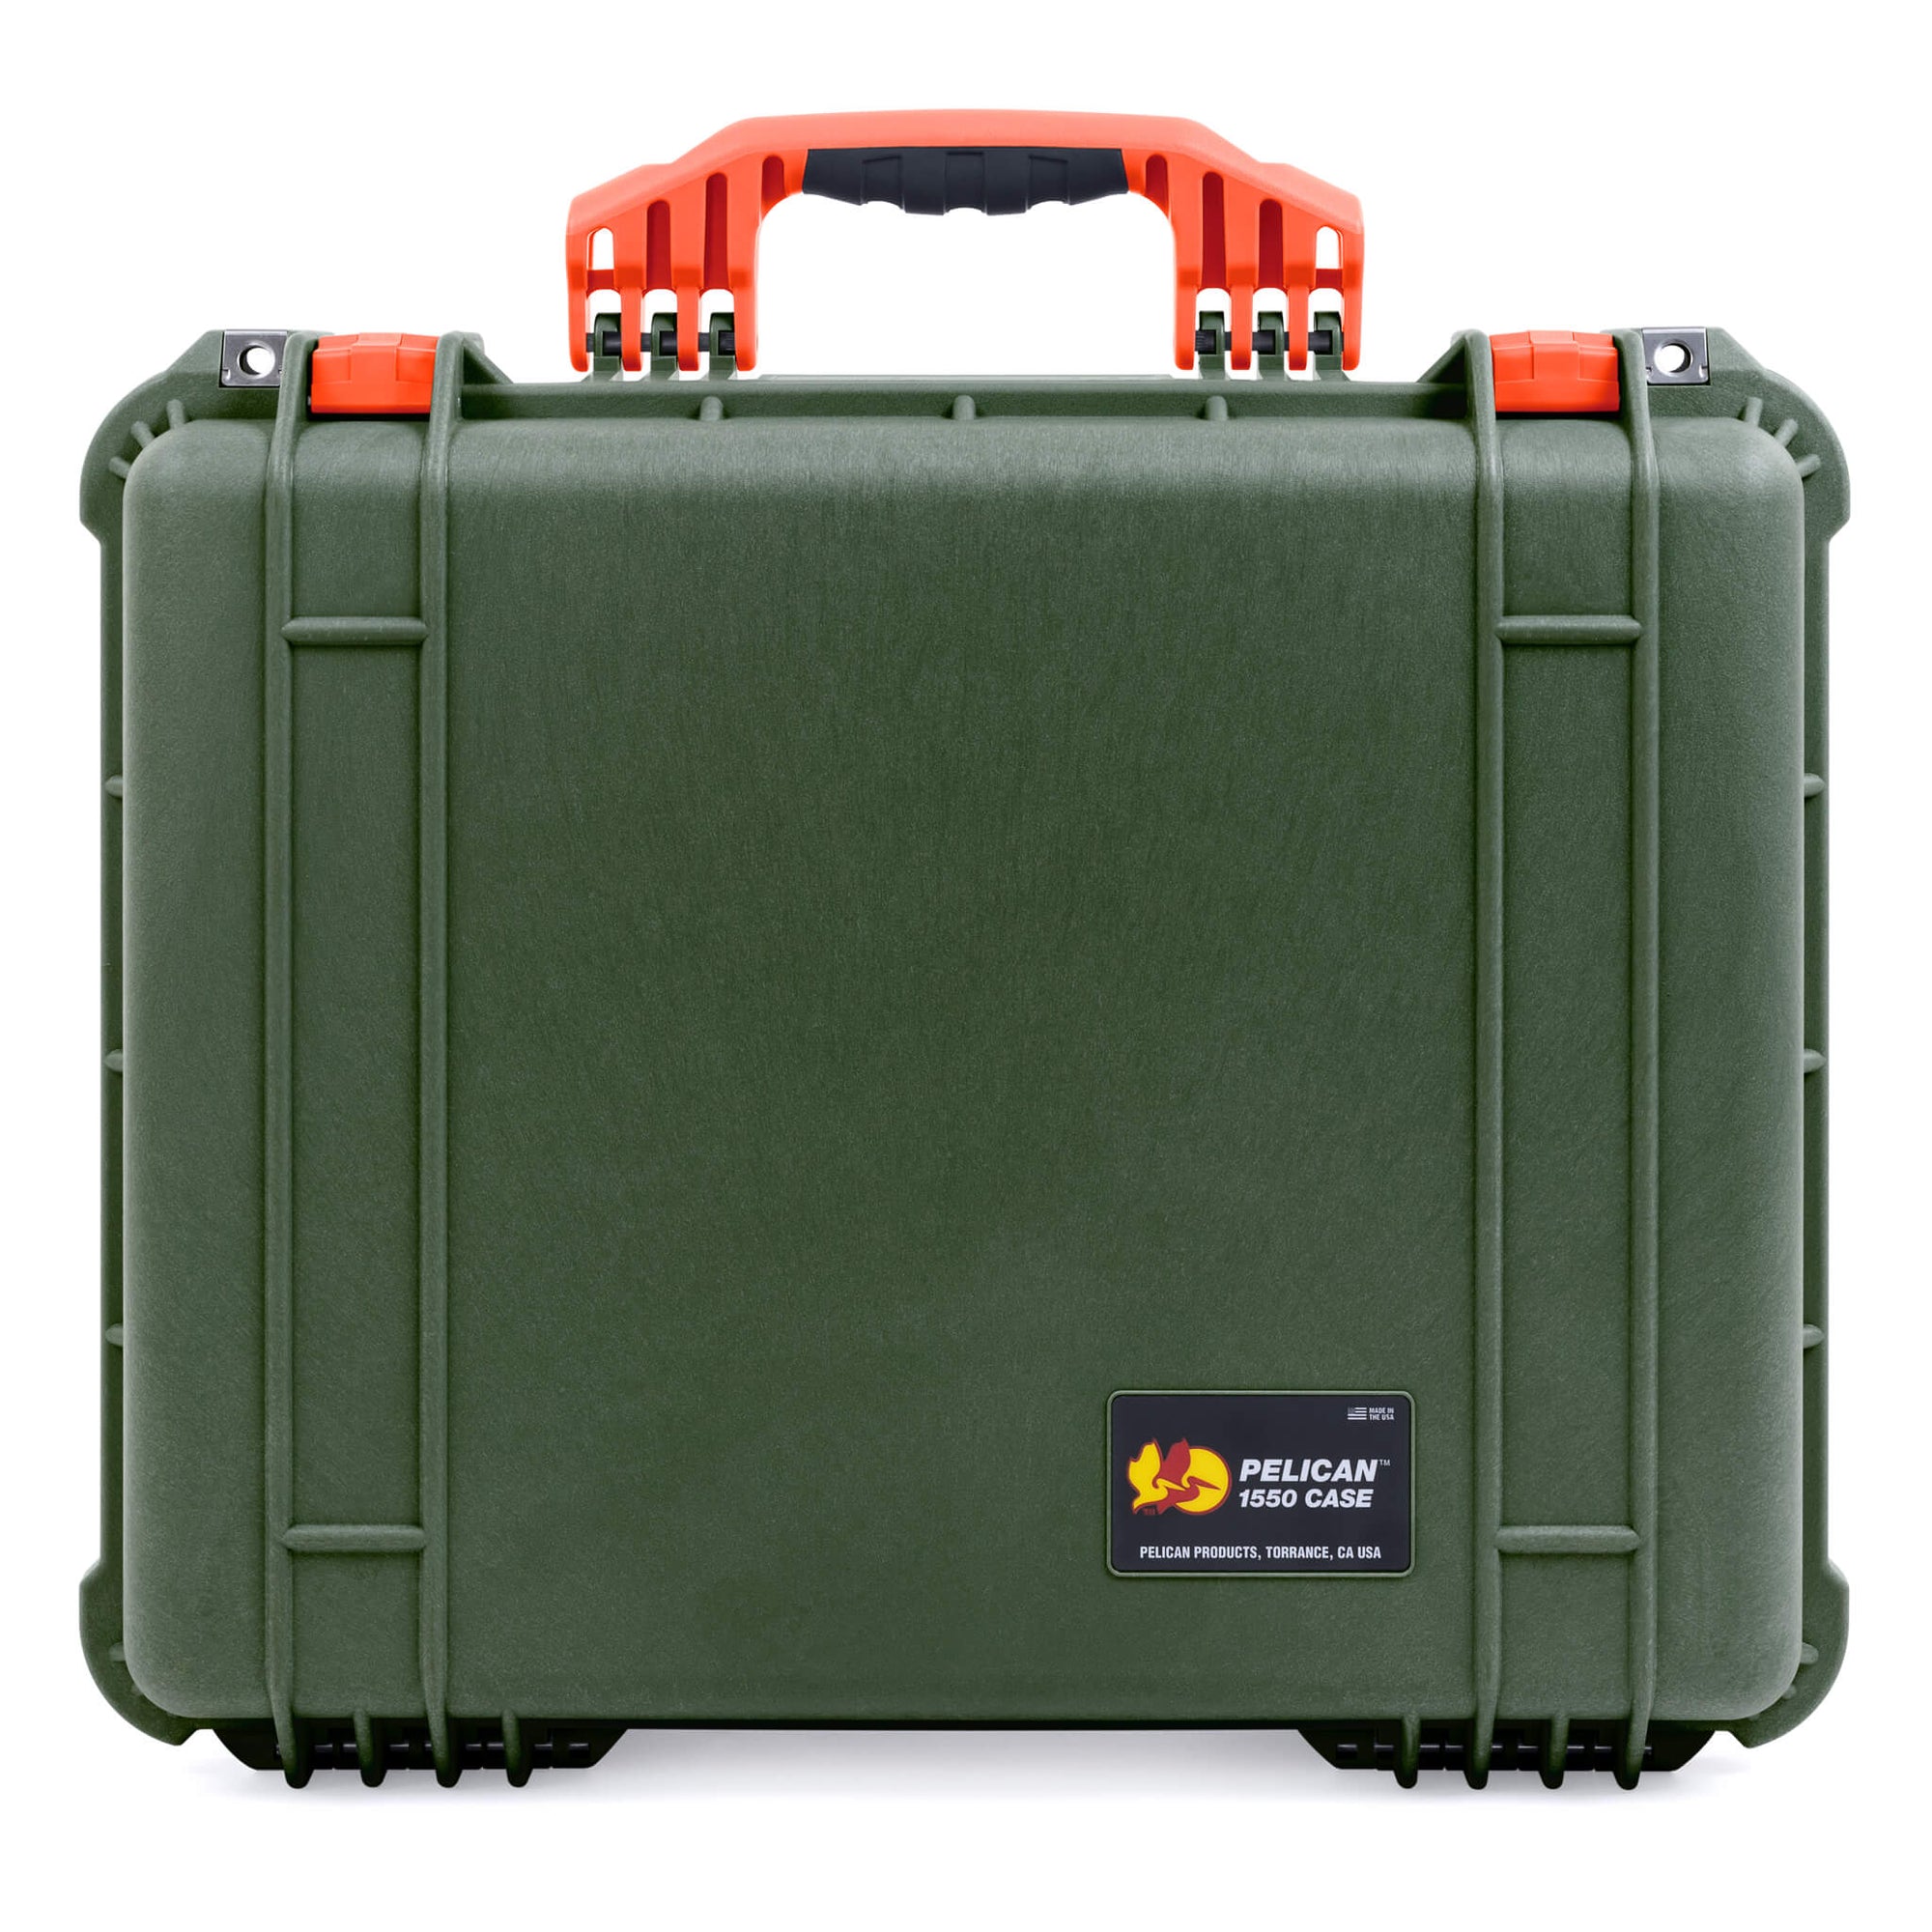 Pelican 1550 Case, OD Green with Orange Handle & Latches ColorCase 